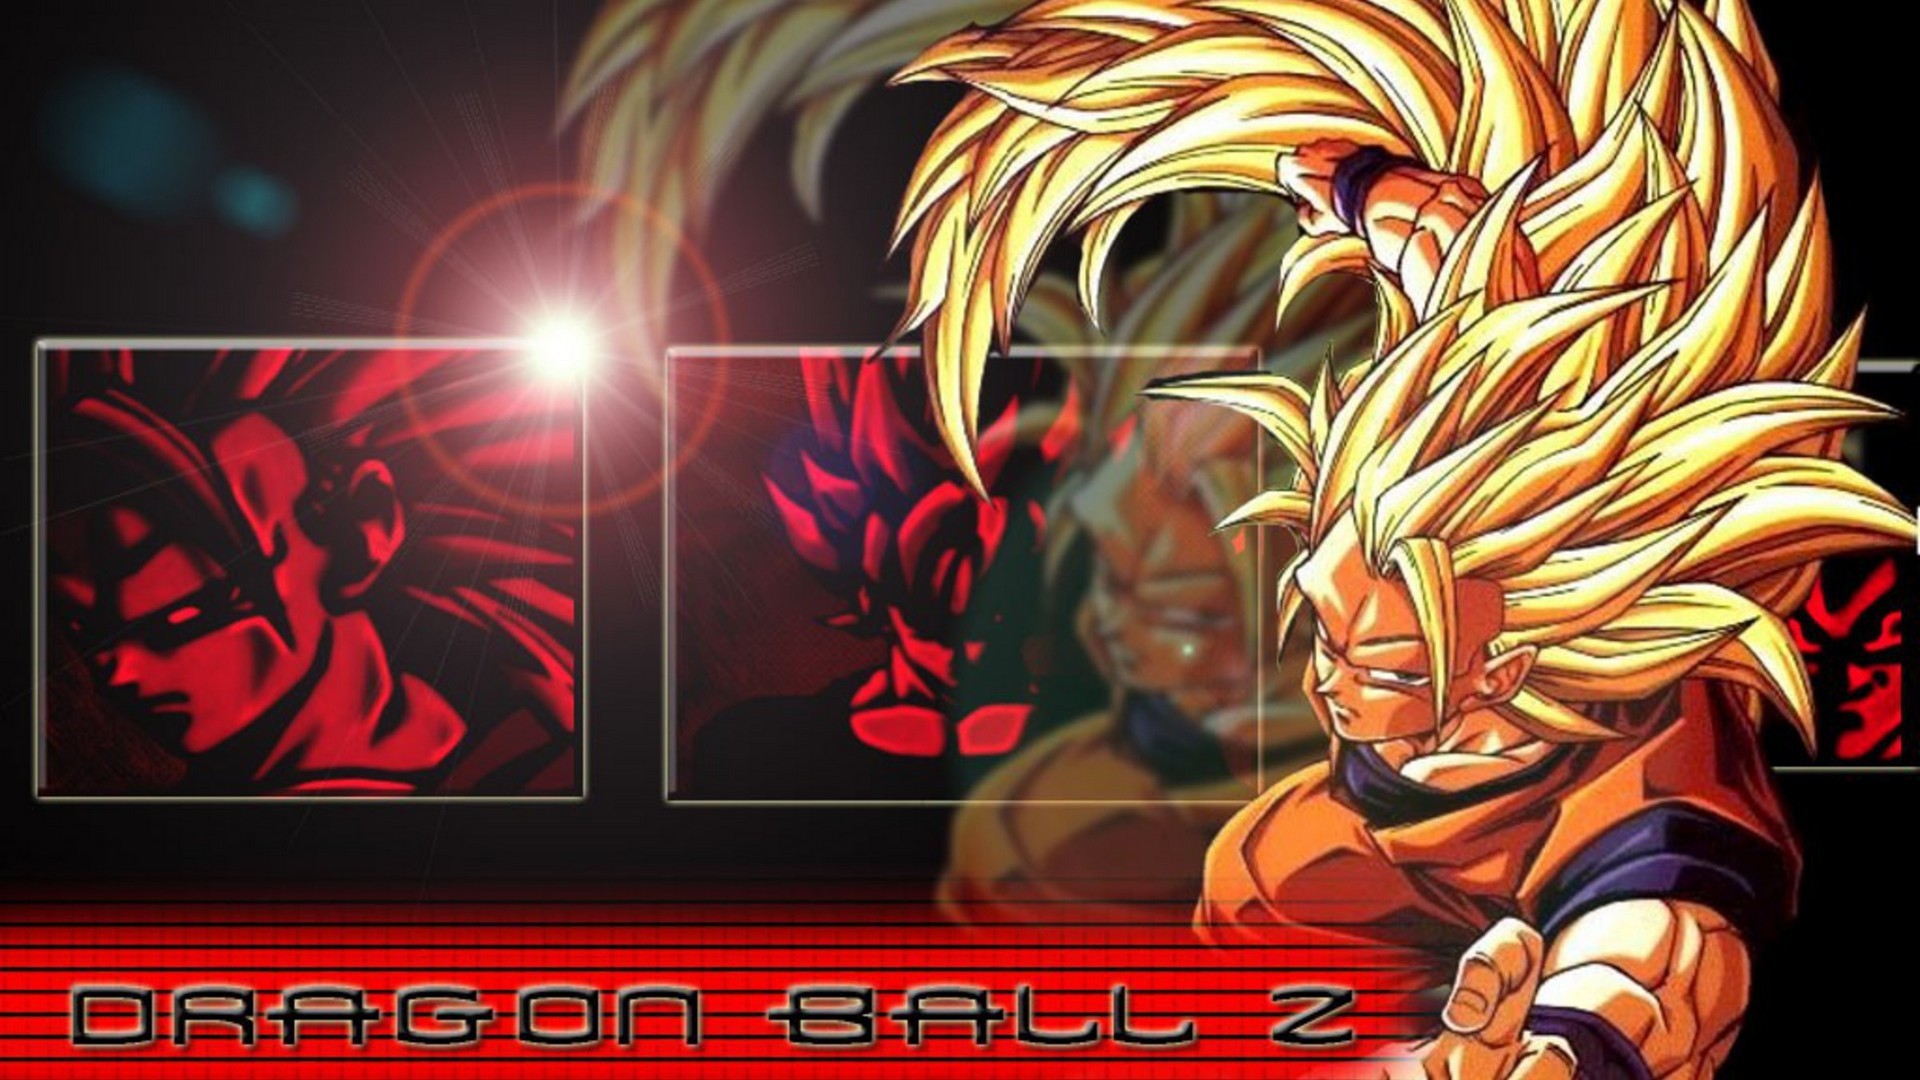 Wallpaper Goku SSJ3 Desktop with image resolution 1920x1080 pixel. You can use this wallpaper as background for your desktop Computer Screensavers, Android or iPhone smartphones